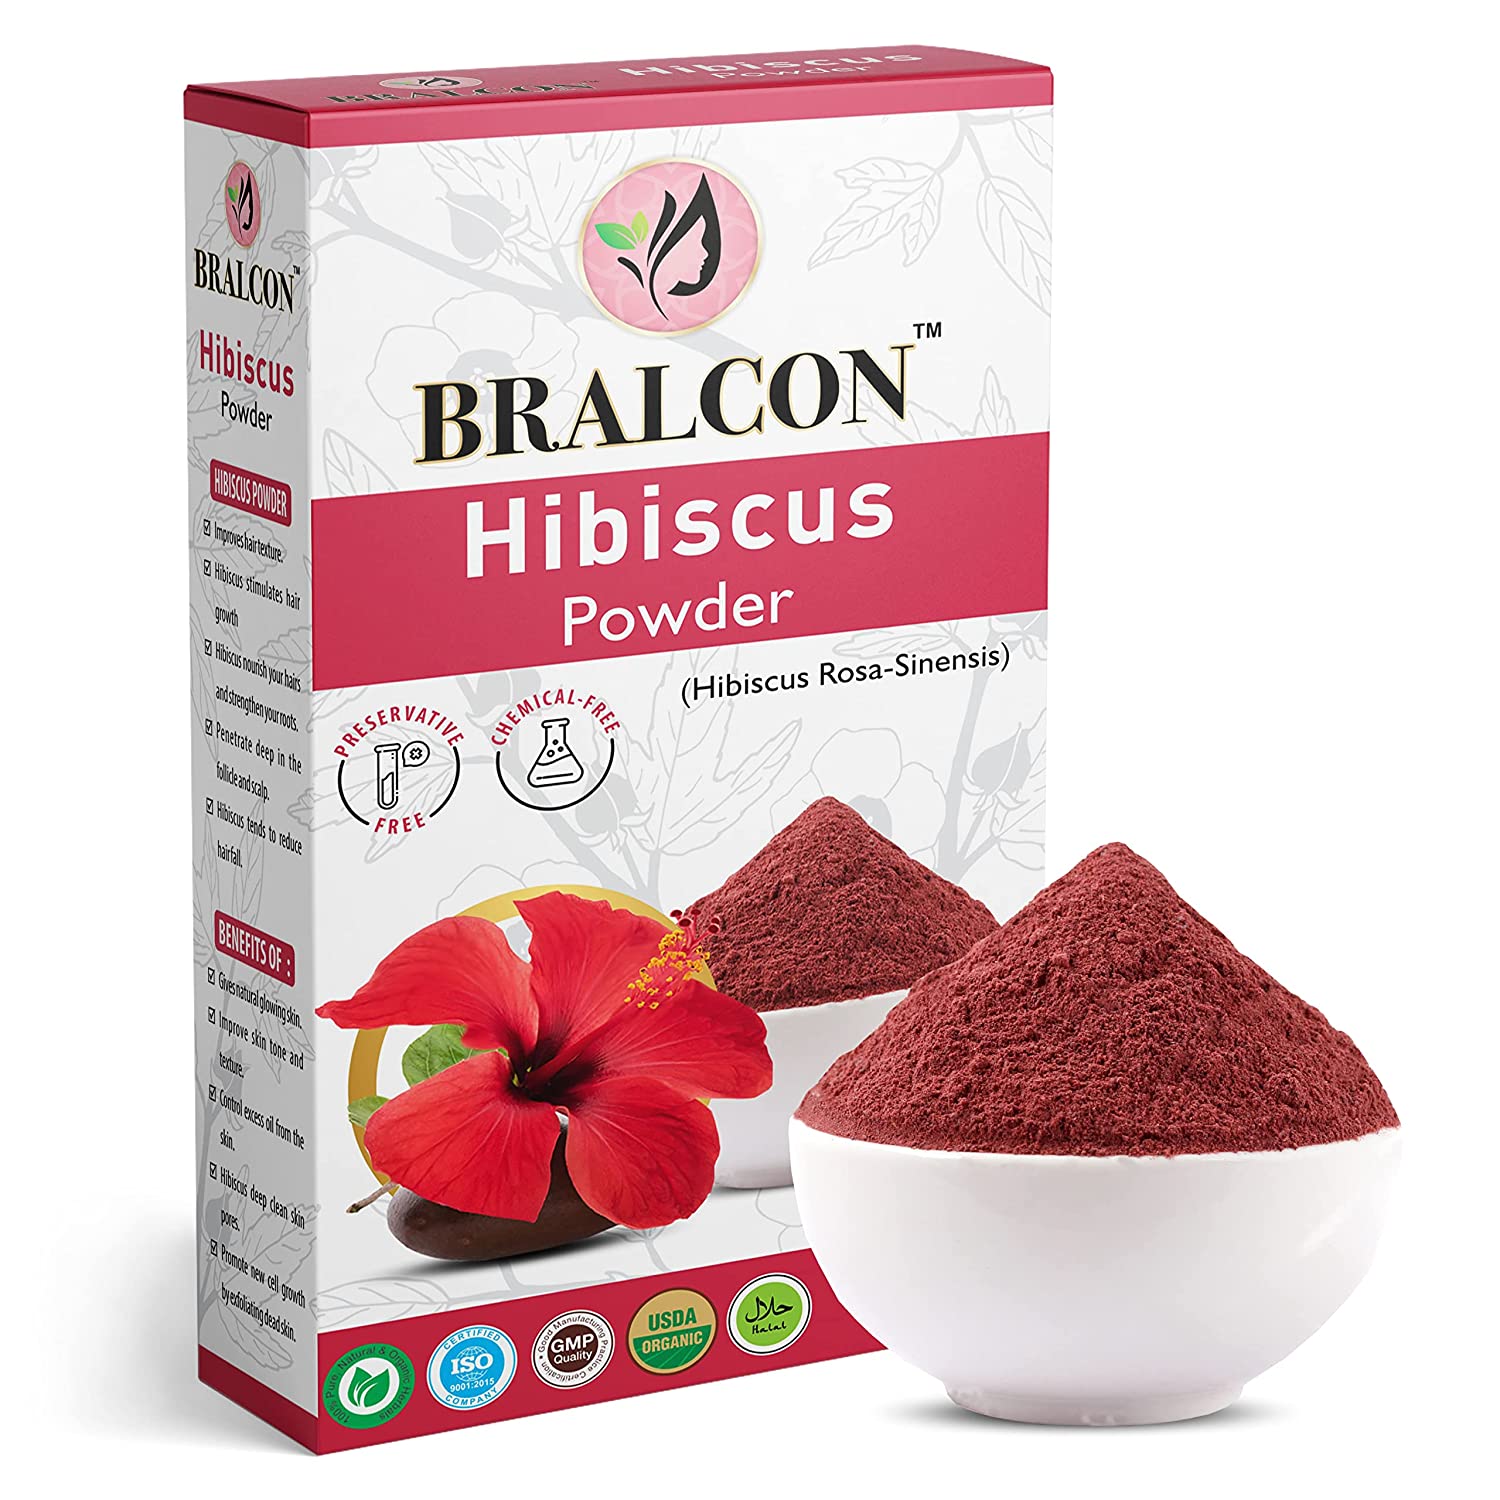 BRALCON Organic Hibiscus Powder-100g - Online Quality Store Official Website